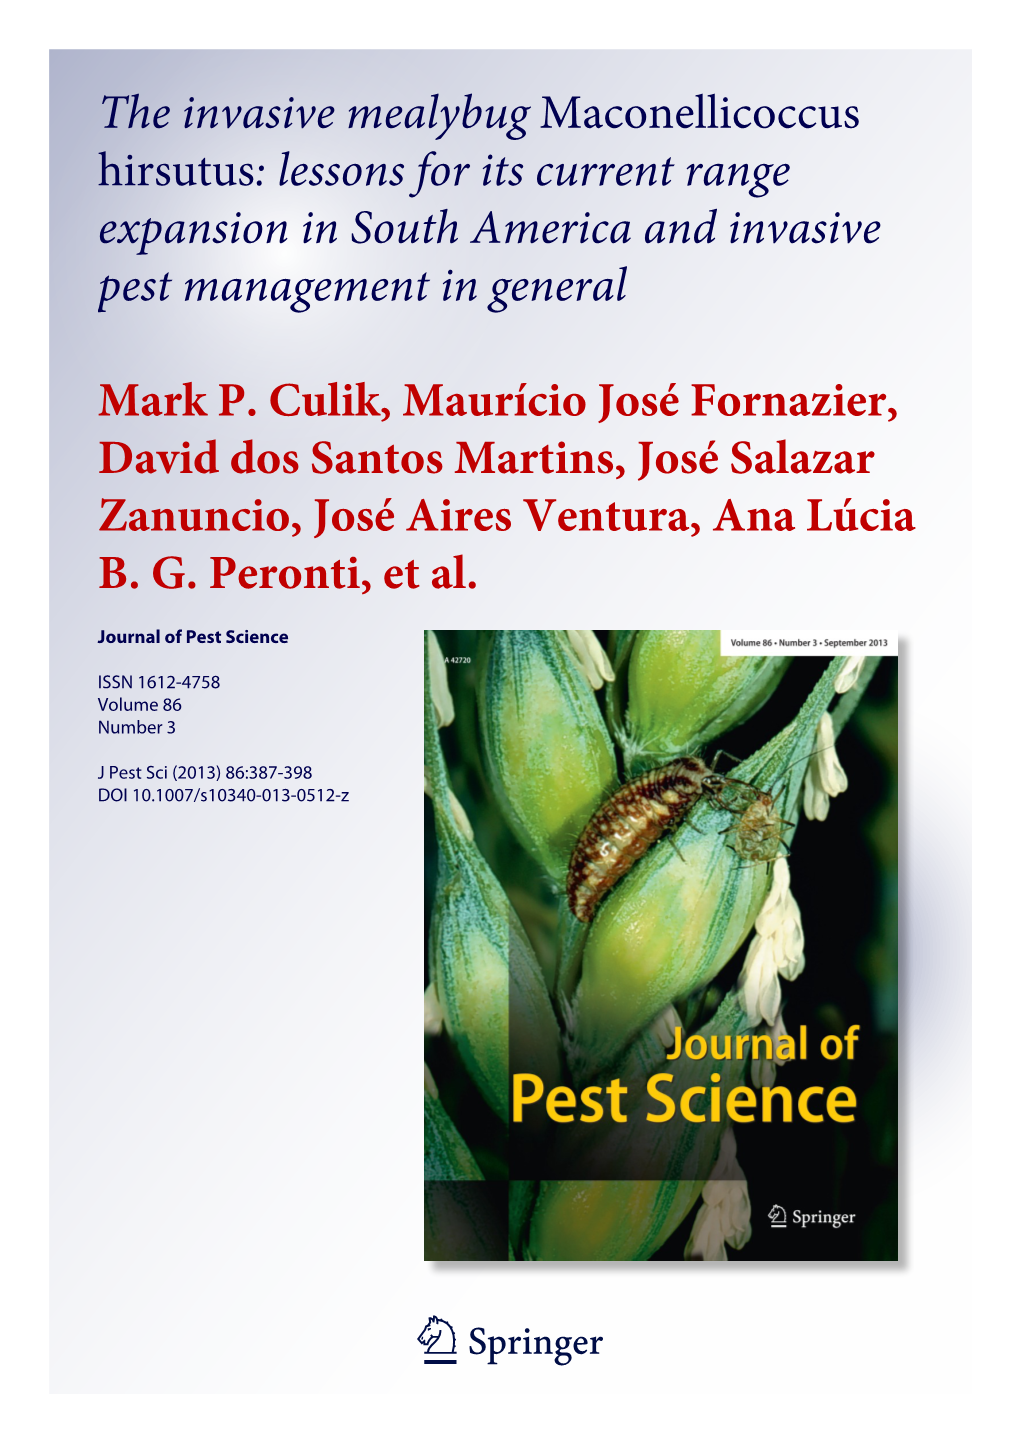 The Invasive Mealybug Maconellicoccus Hirsutus: Lessons for Its Current Range Expansion in South America and Invasive Pest Management in General